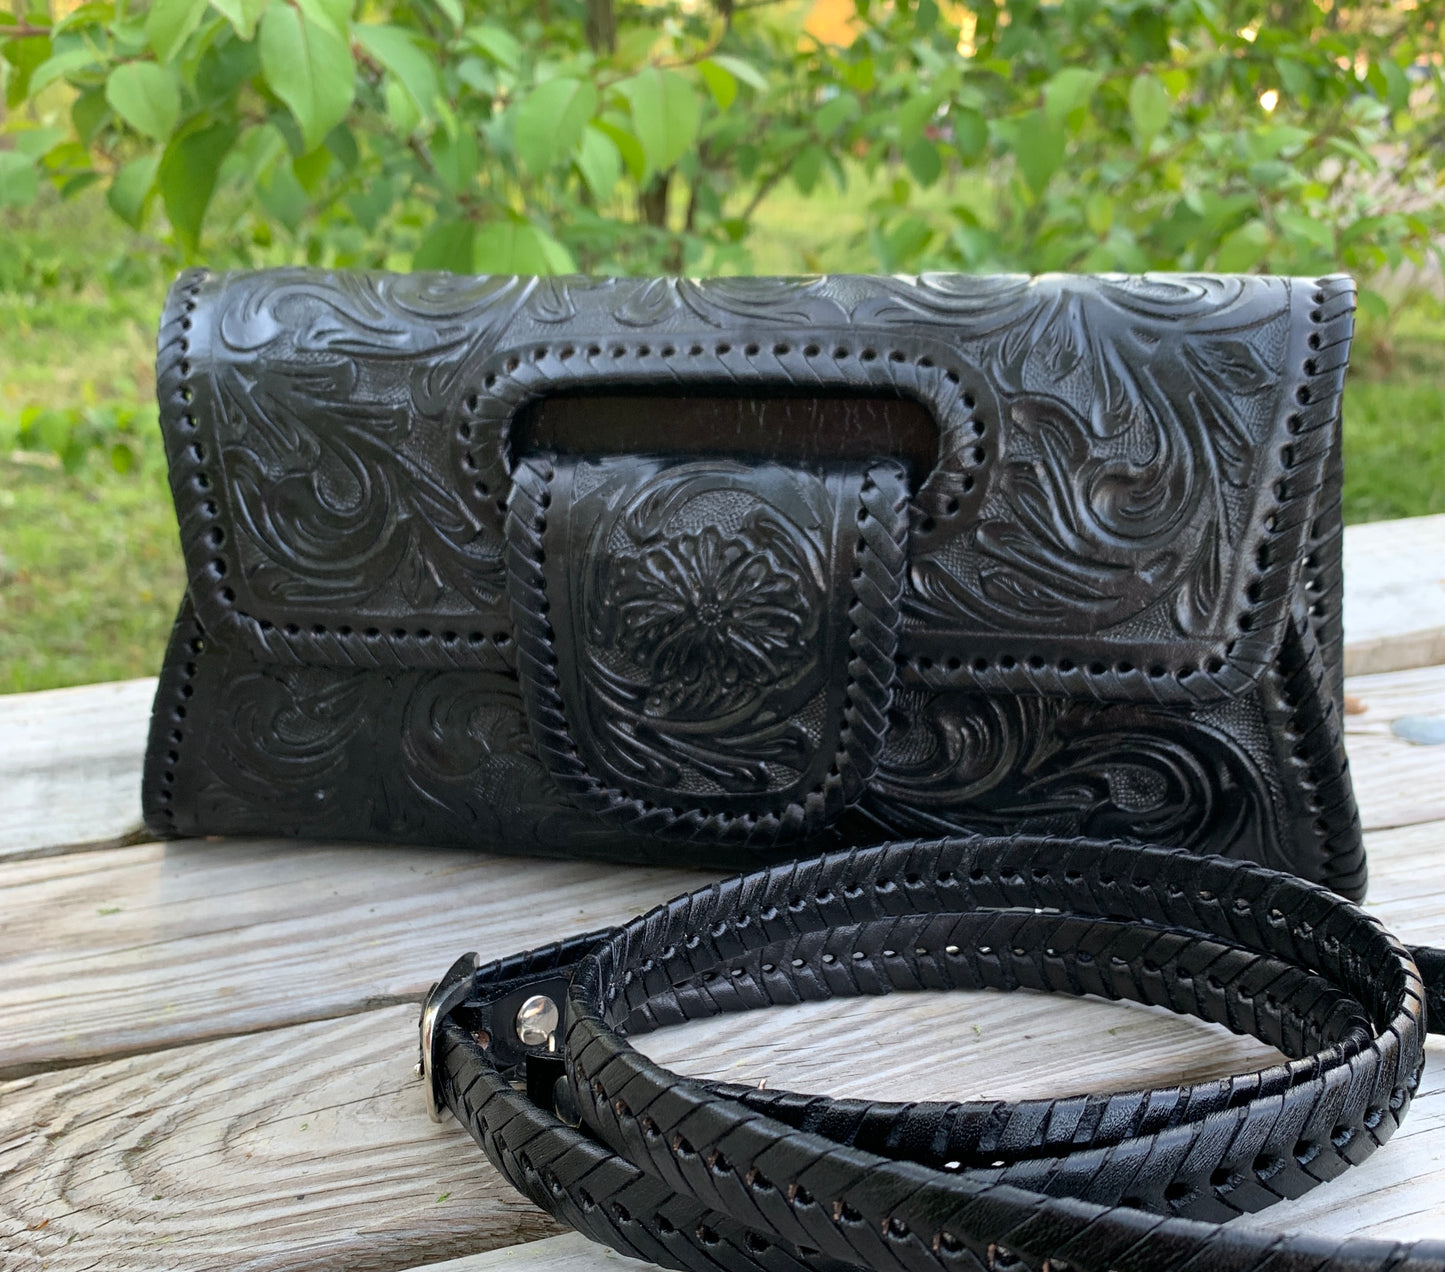 Hand-Tooled Leather Small Clutch & Crossbody "LENGUETA" by ALLE, more Colors - ALLE Handbags